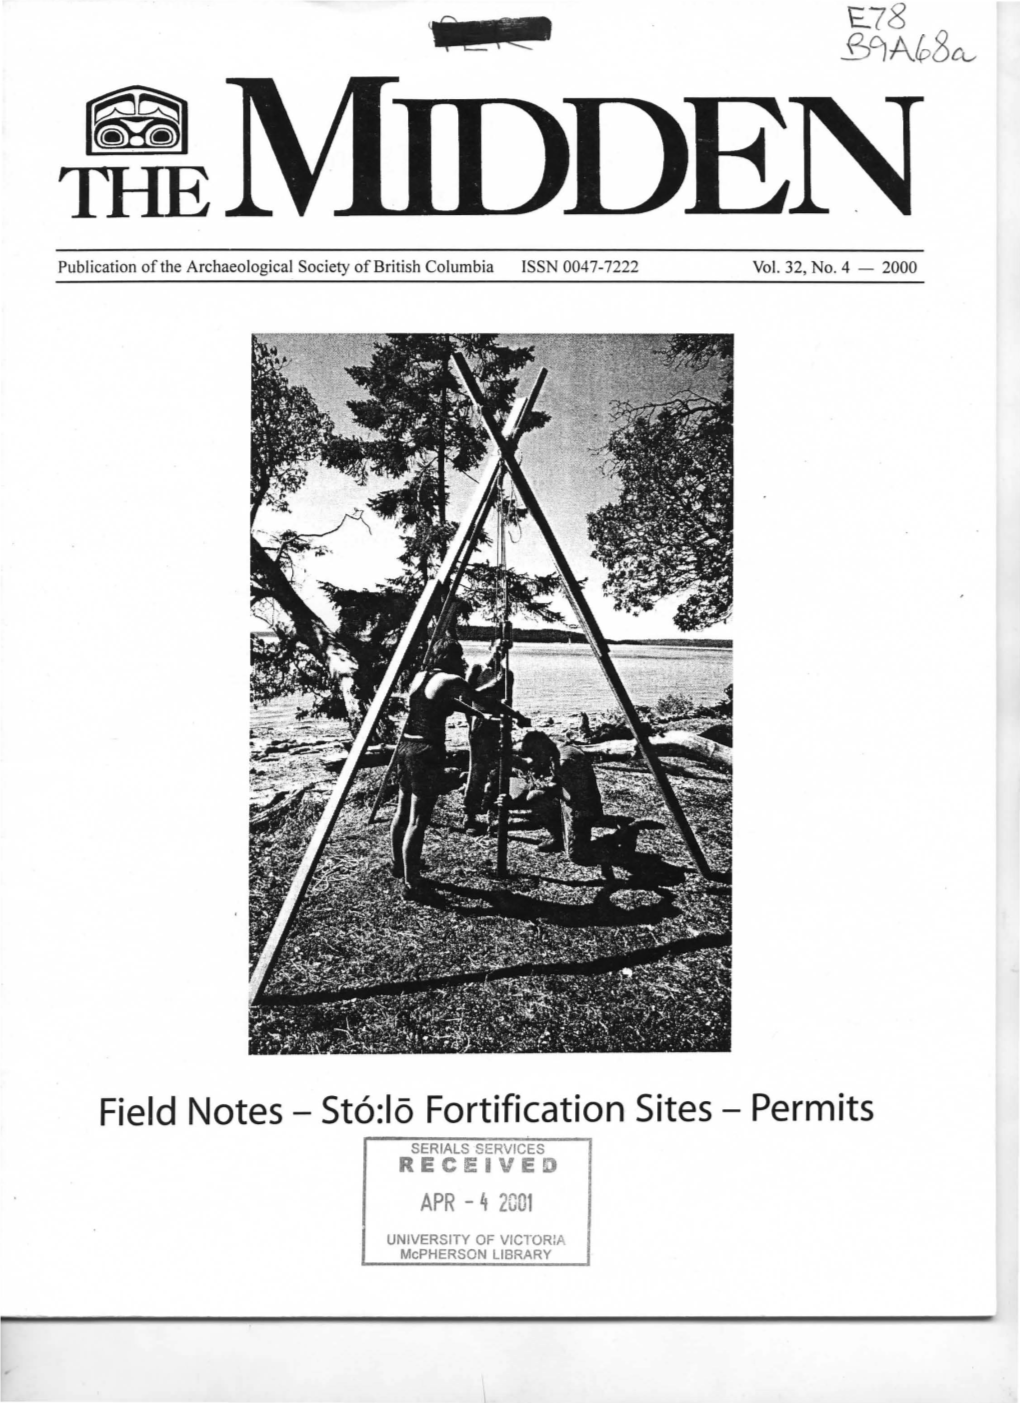 Field Notes- St6:16 Fortification Sites- Permits SERIALS SERVICES RECEIVED APR - 4 2001